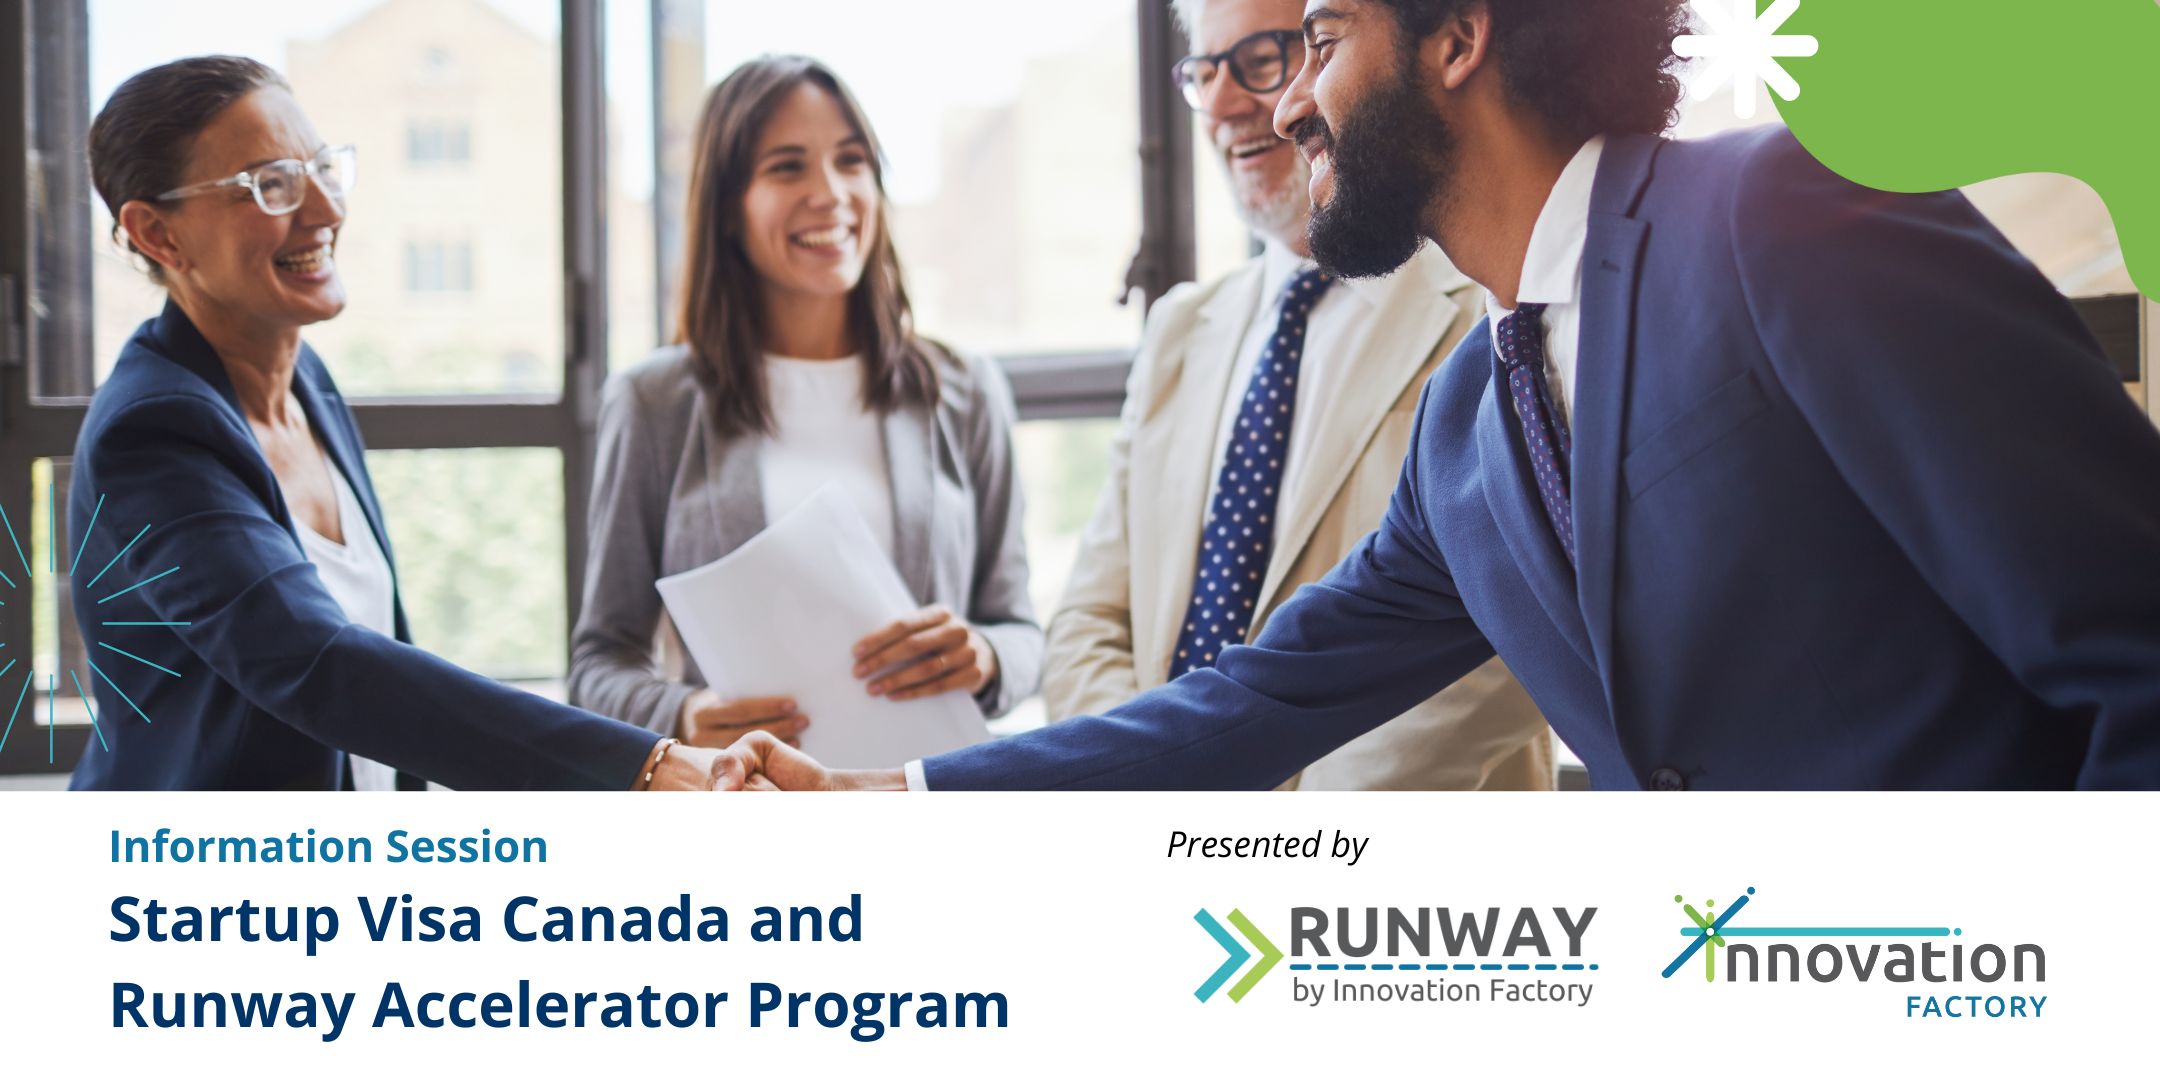 Start-up visa Canada and Runway Accelerator Program information session presented by Innovation Factory. A diverse group of business professionals shaking hands.